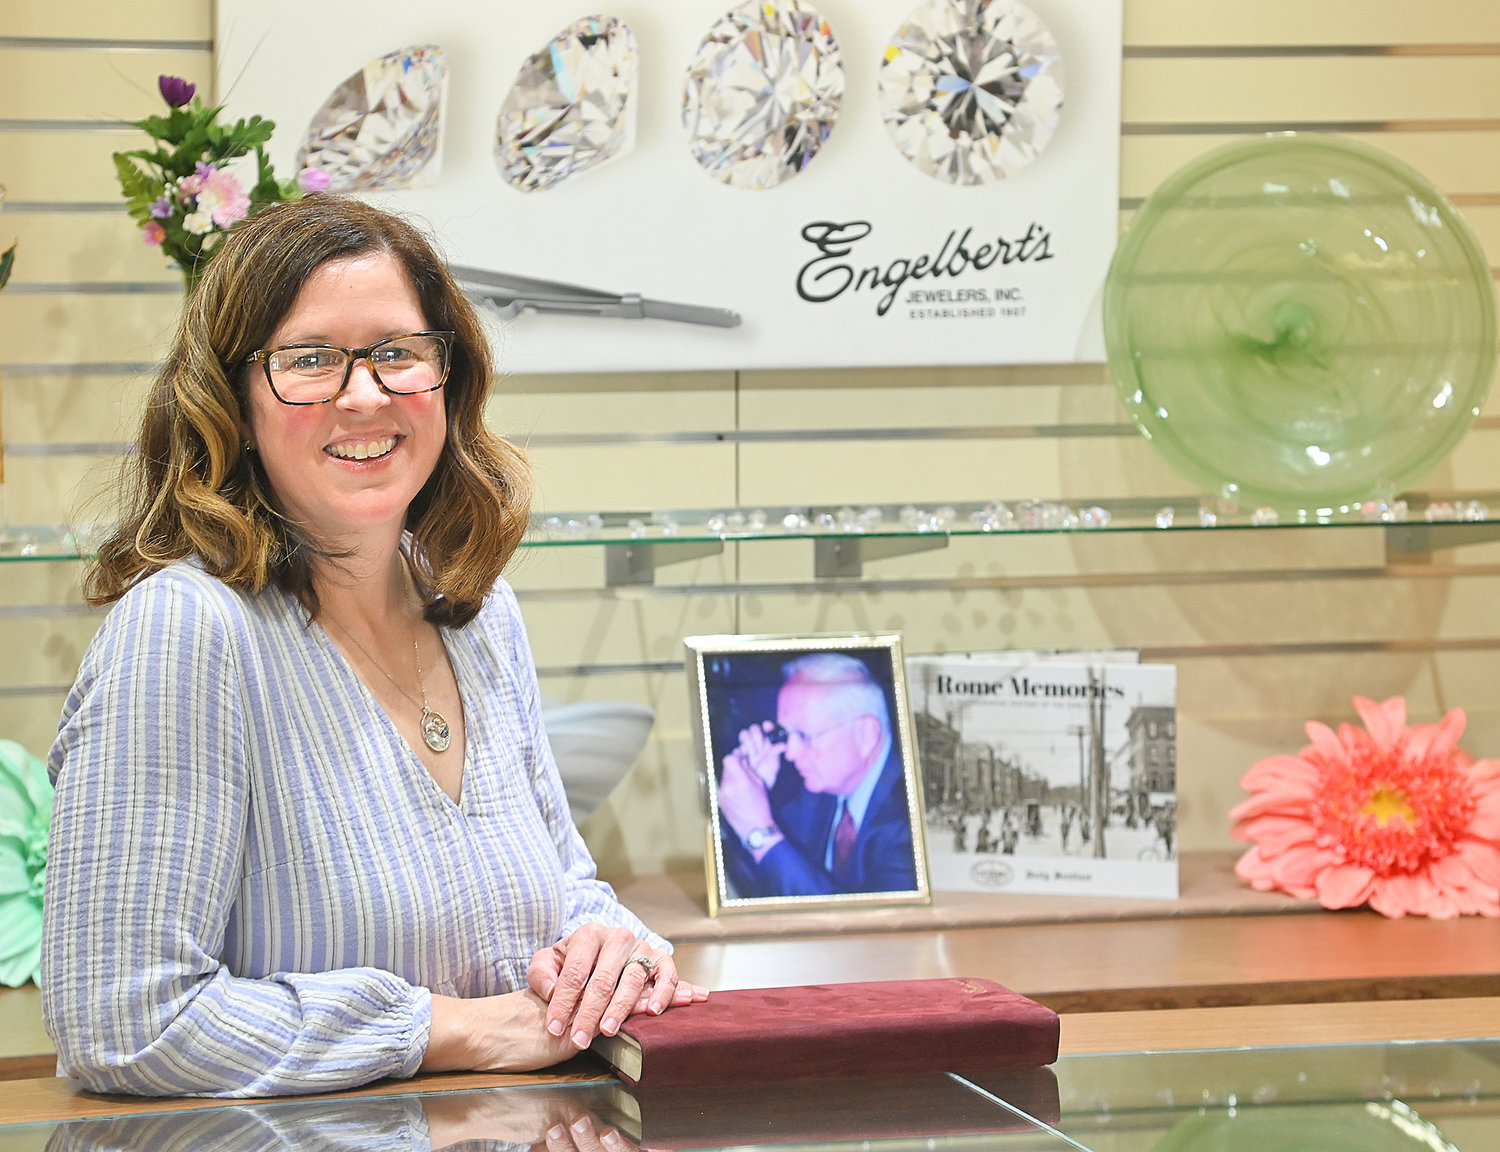 Sarah Engelbert Rushton, current owner of Engelbert’s Jewelers on West Dominick Street, stands behind the counter of her store.  Engelbert’s is celebrating 115 years in business.